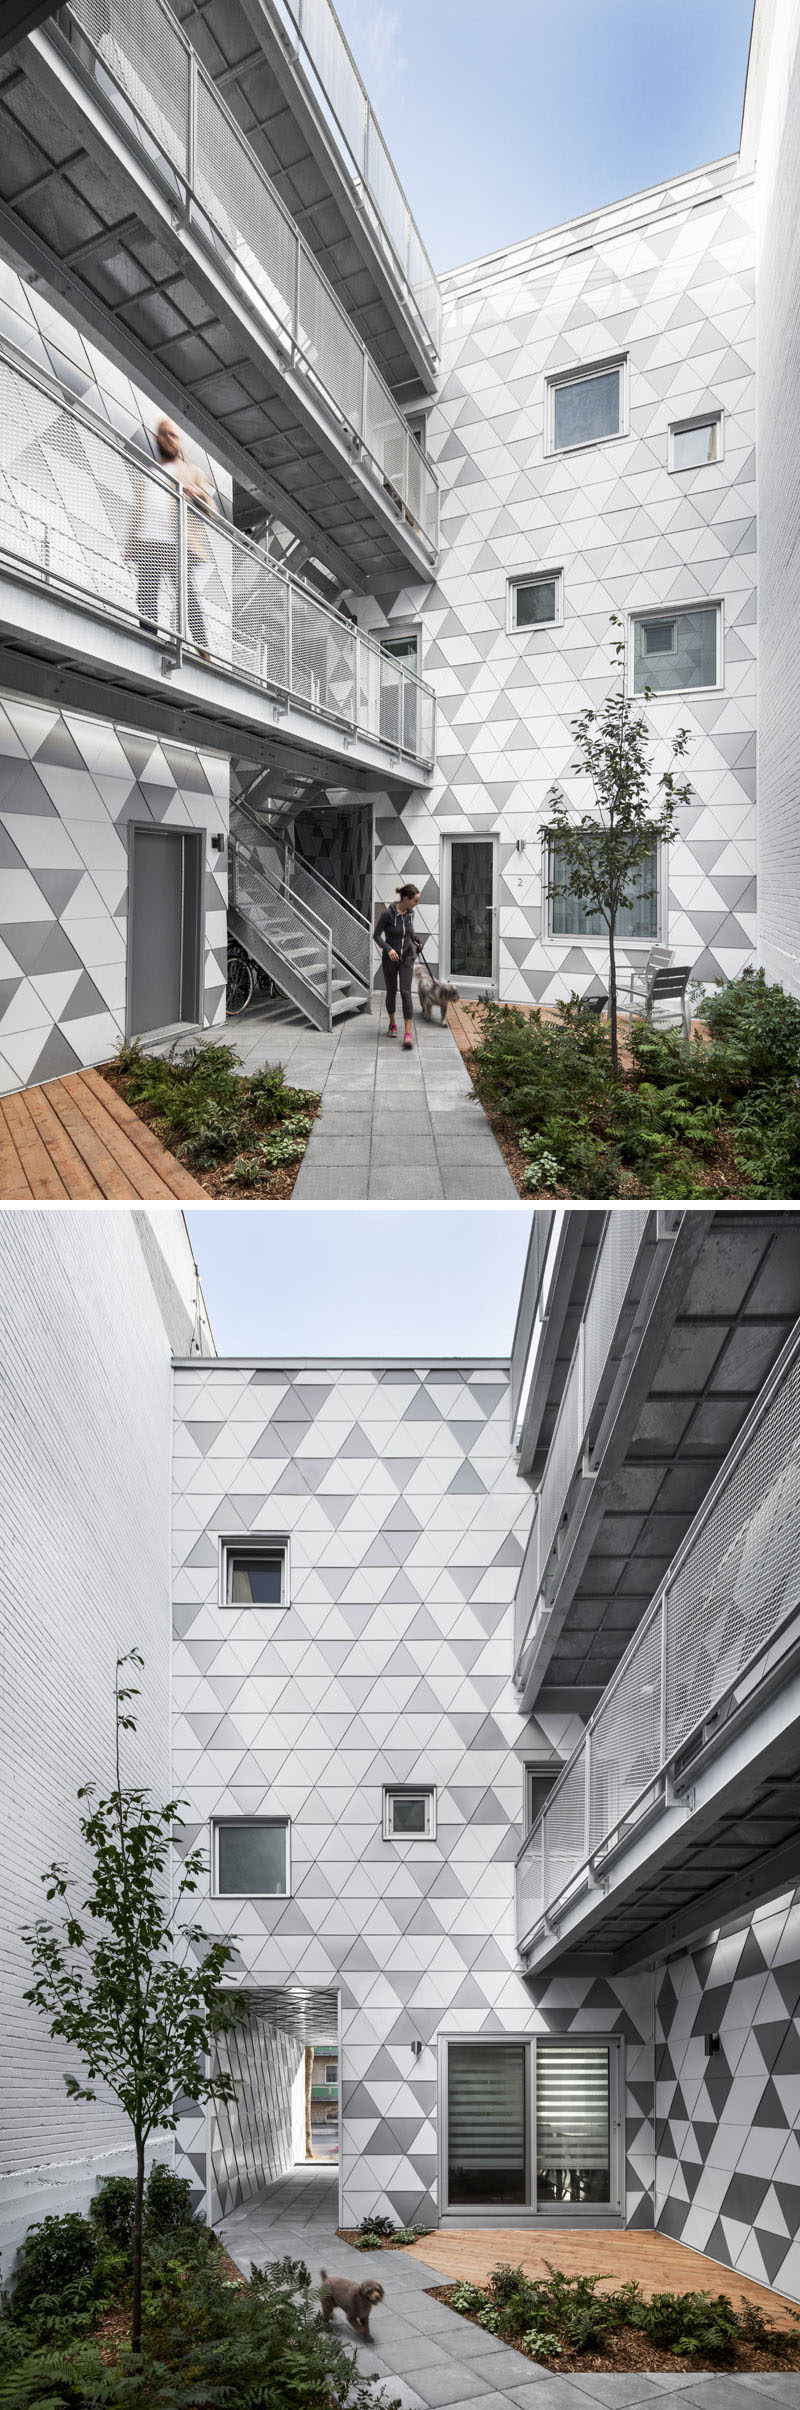 ADHOC architectes have designed a small, brick residential building in Montreal, Canada, that has geometric entryway and is inspired by a Geode. #Architecture #BuildingDesign